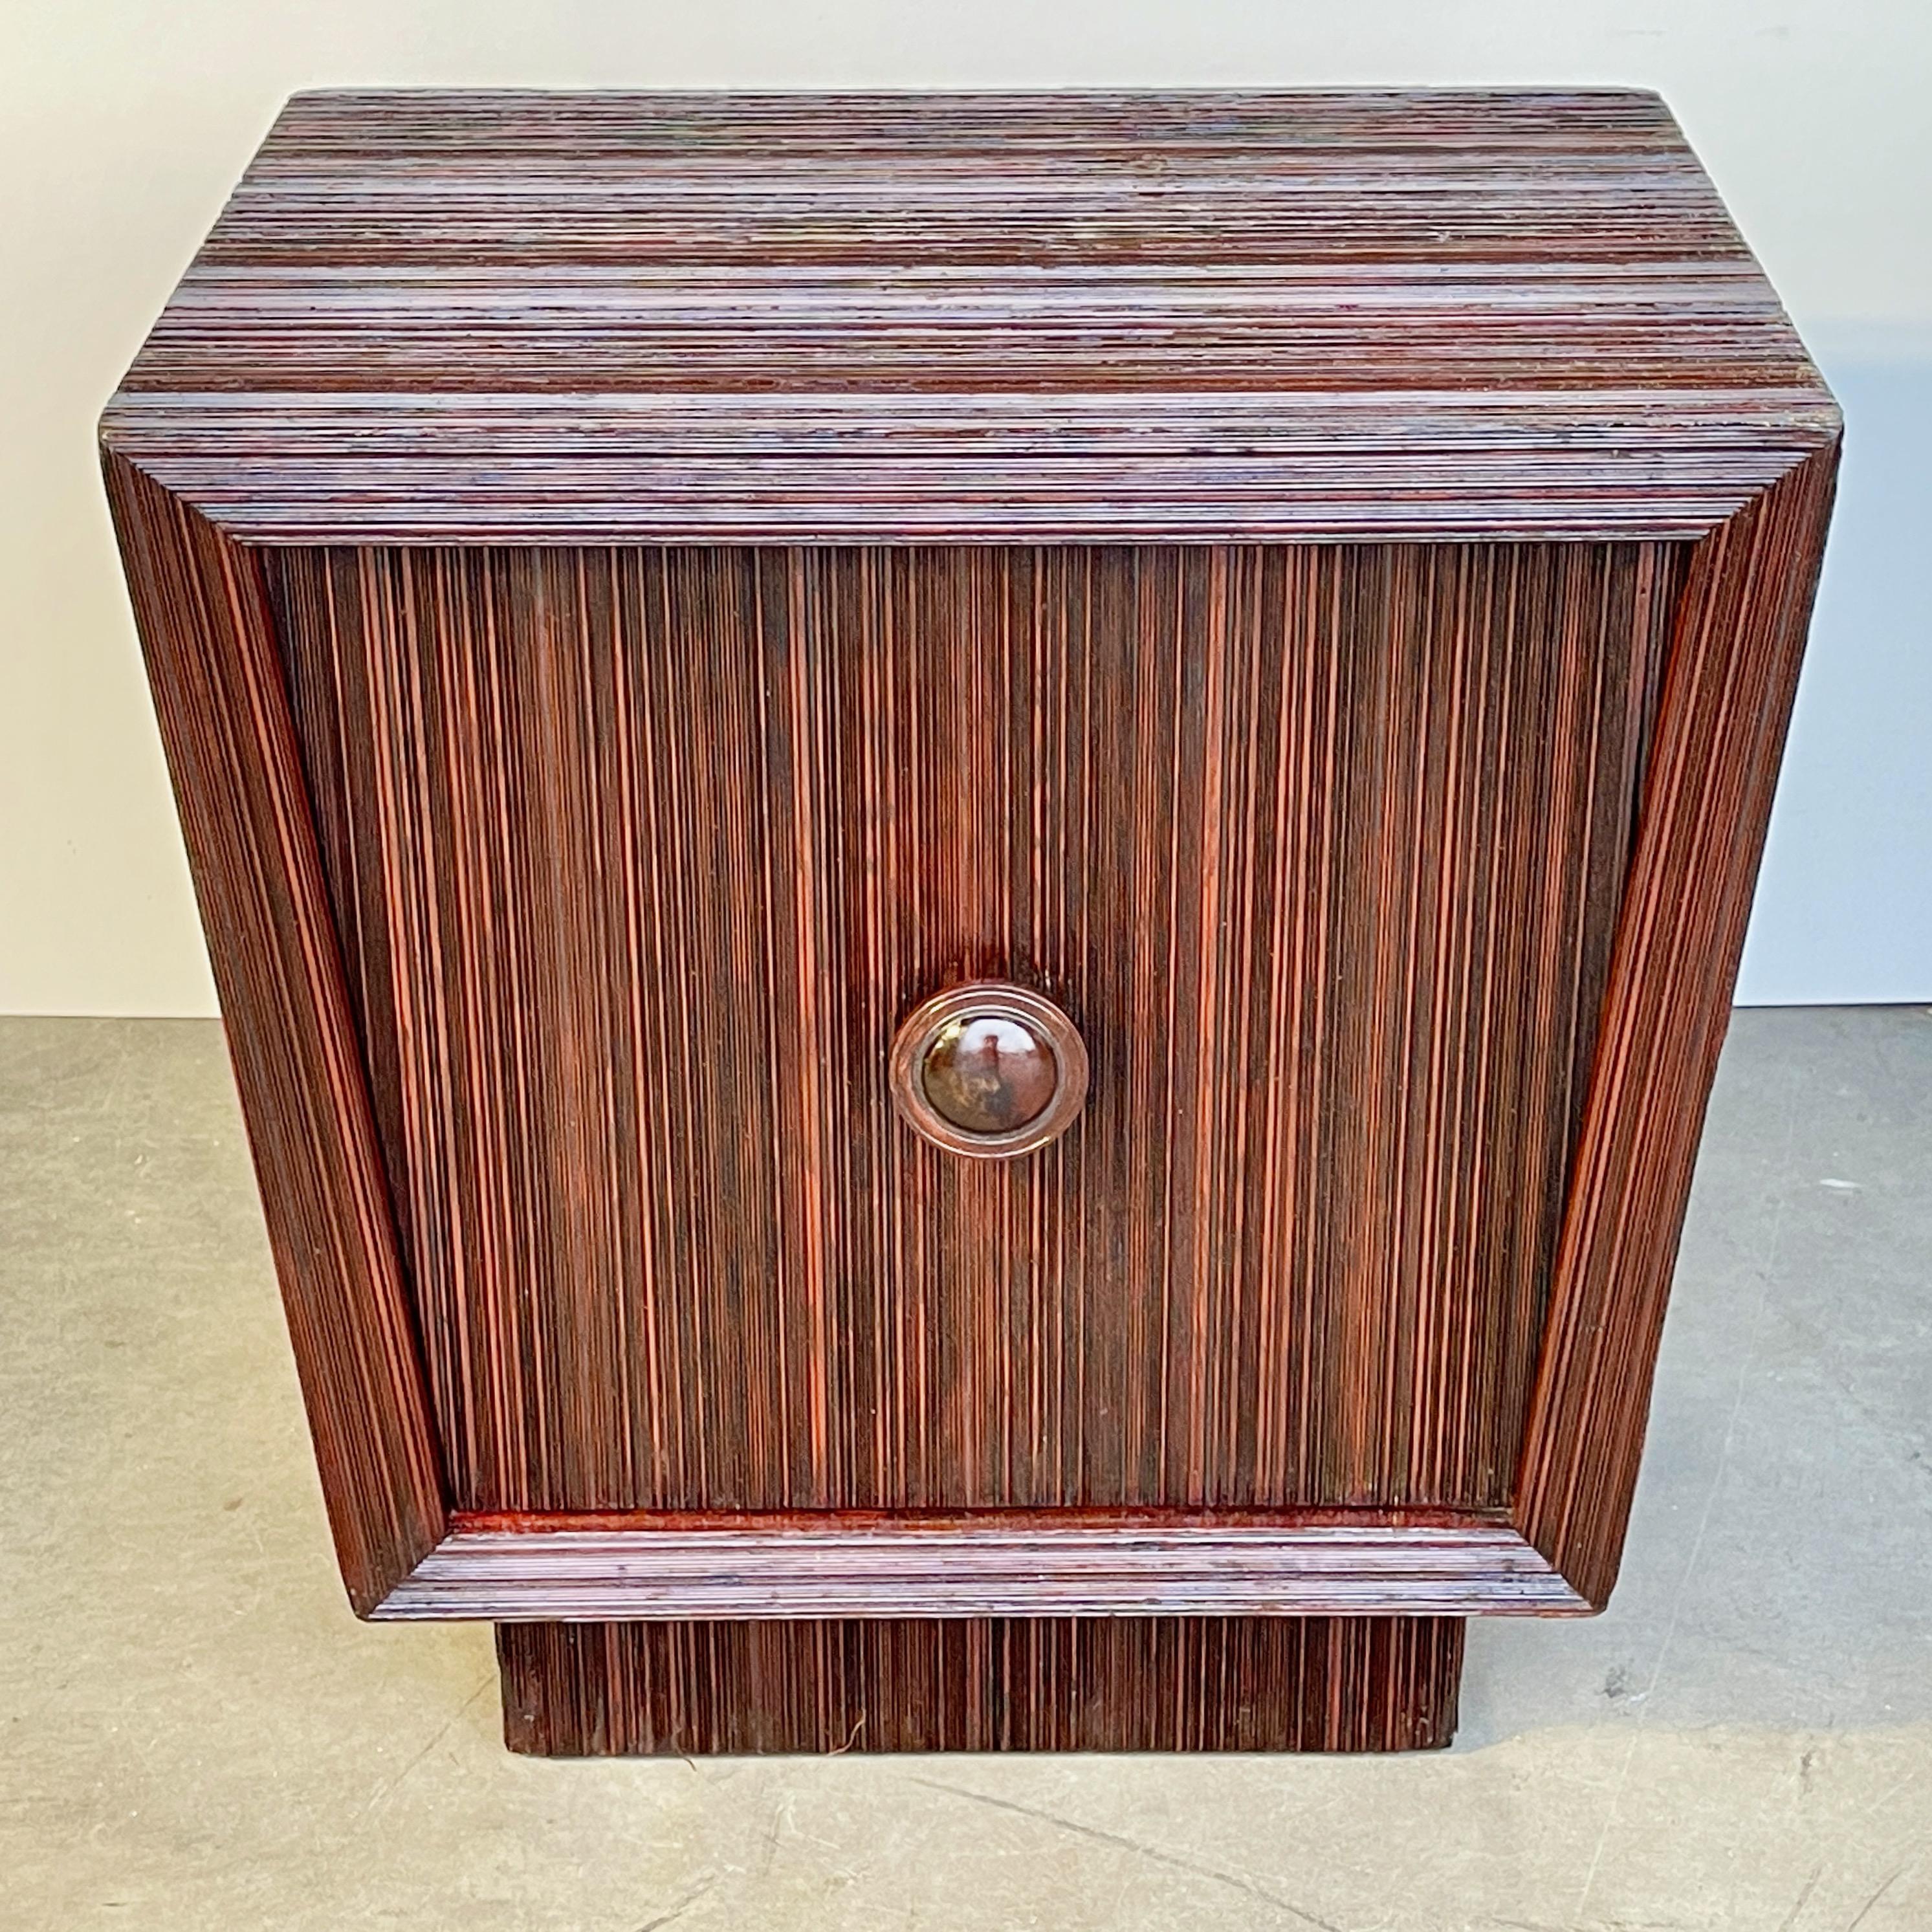 James Mont Design, signed, trapezoidal single door cabinet in pencil reed, suitable as nightstand or side cabinet. Circa 1948.
Measures 24